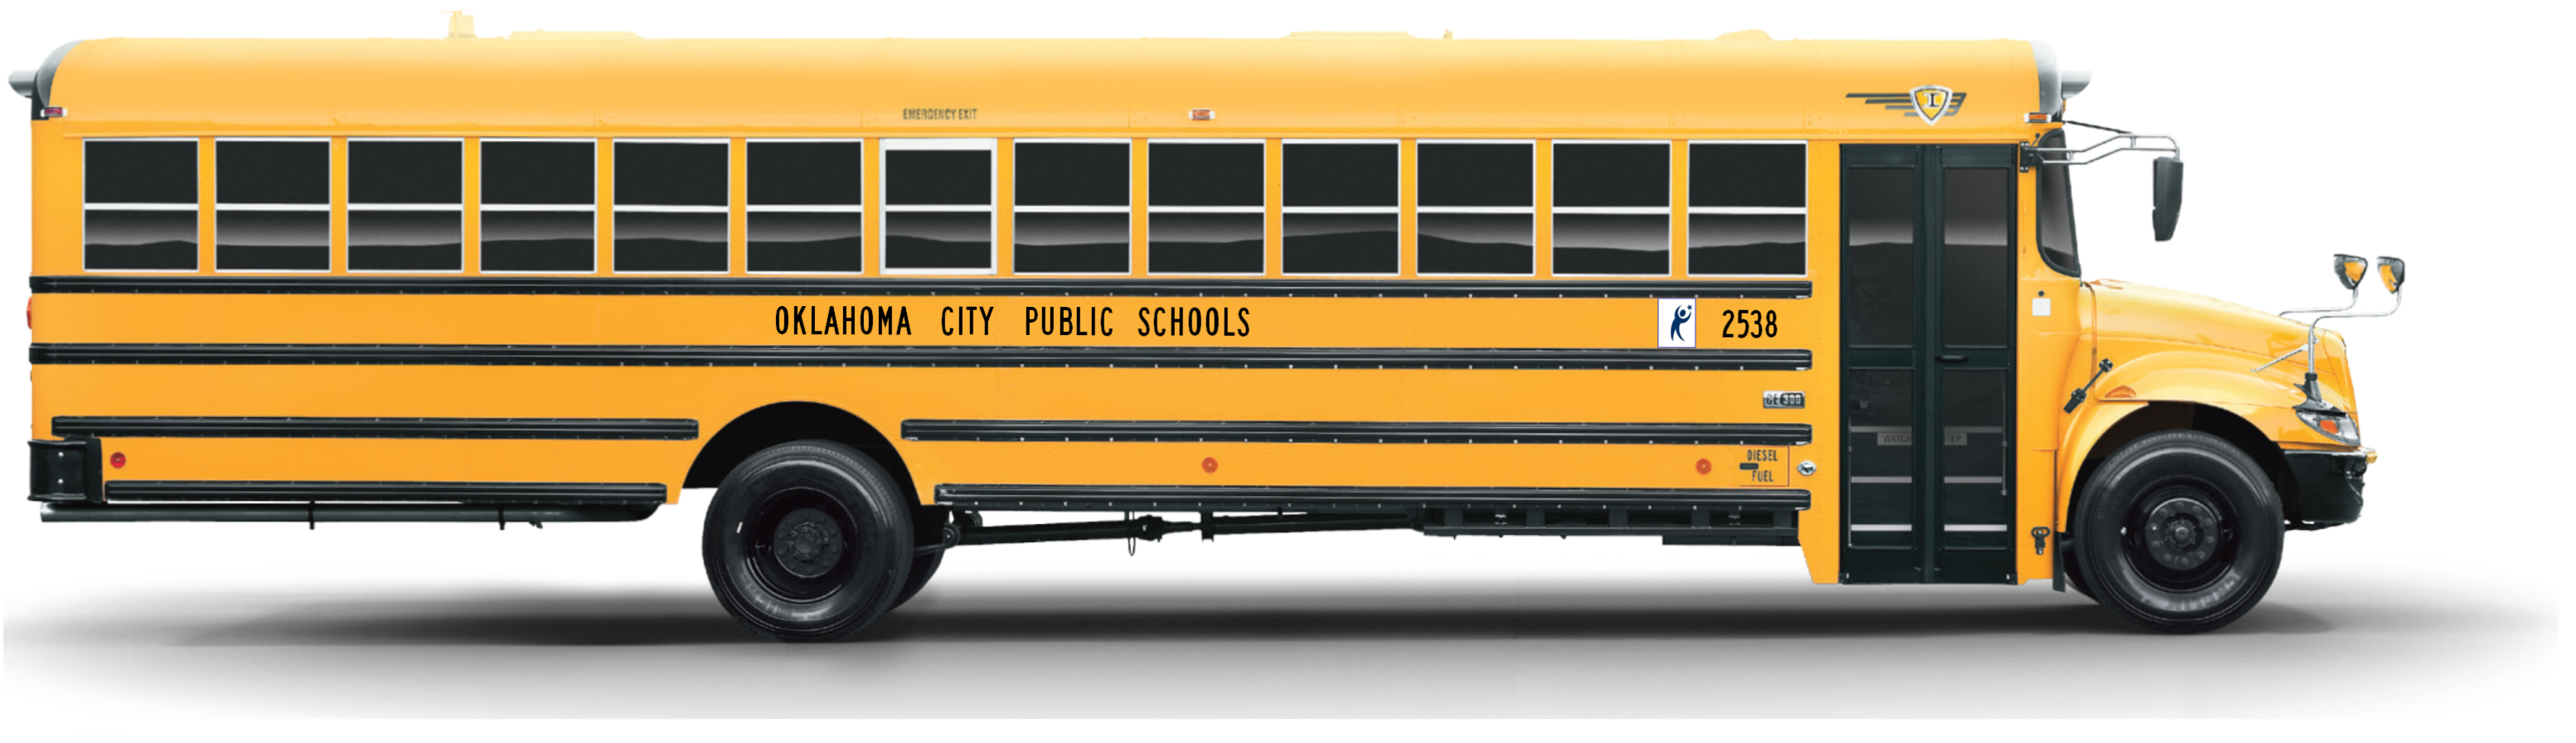 City Bus Side View Png - File:oklahoma City Public Schools (Ce Series).png, Transparent background PNG HD thumbnail